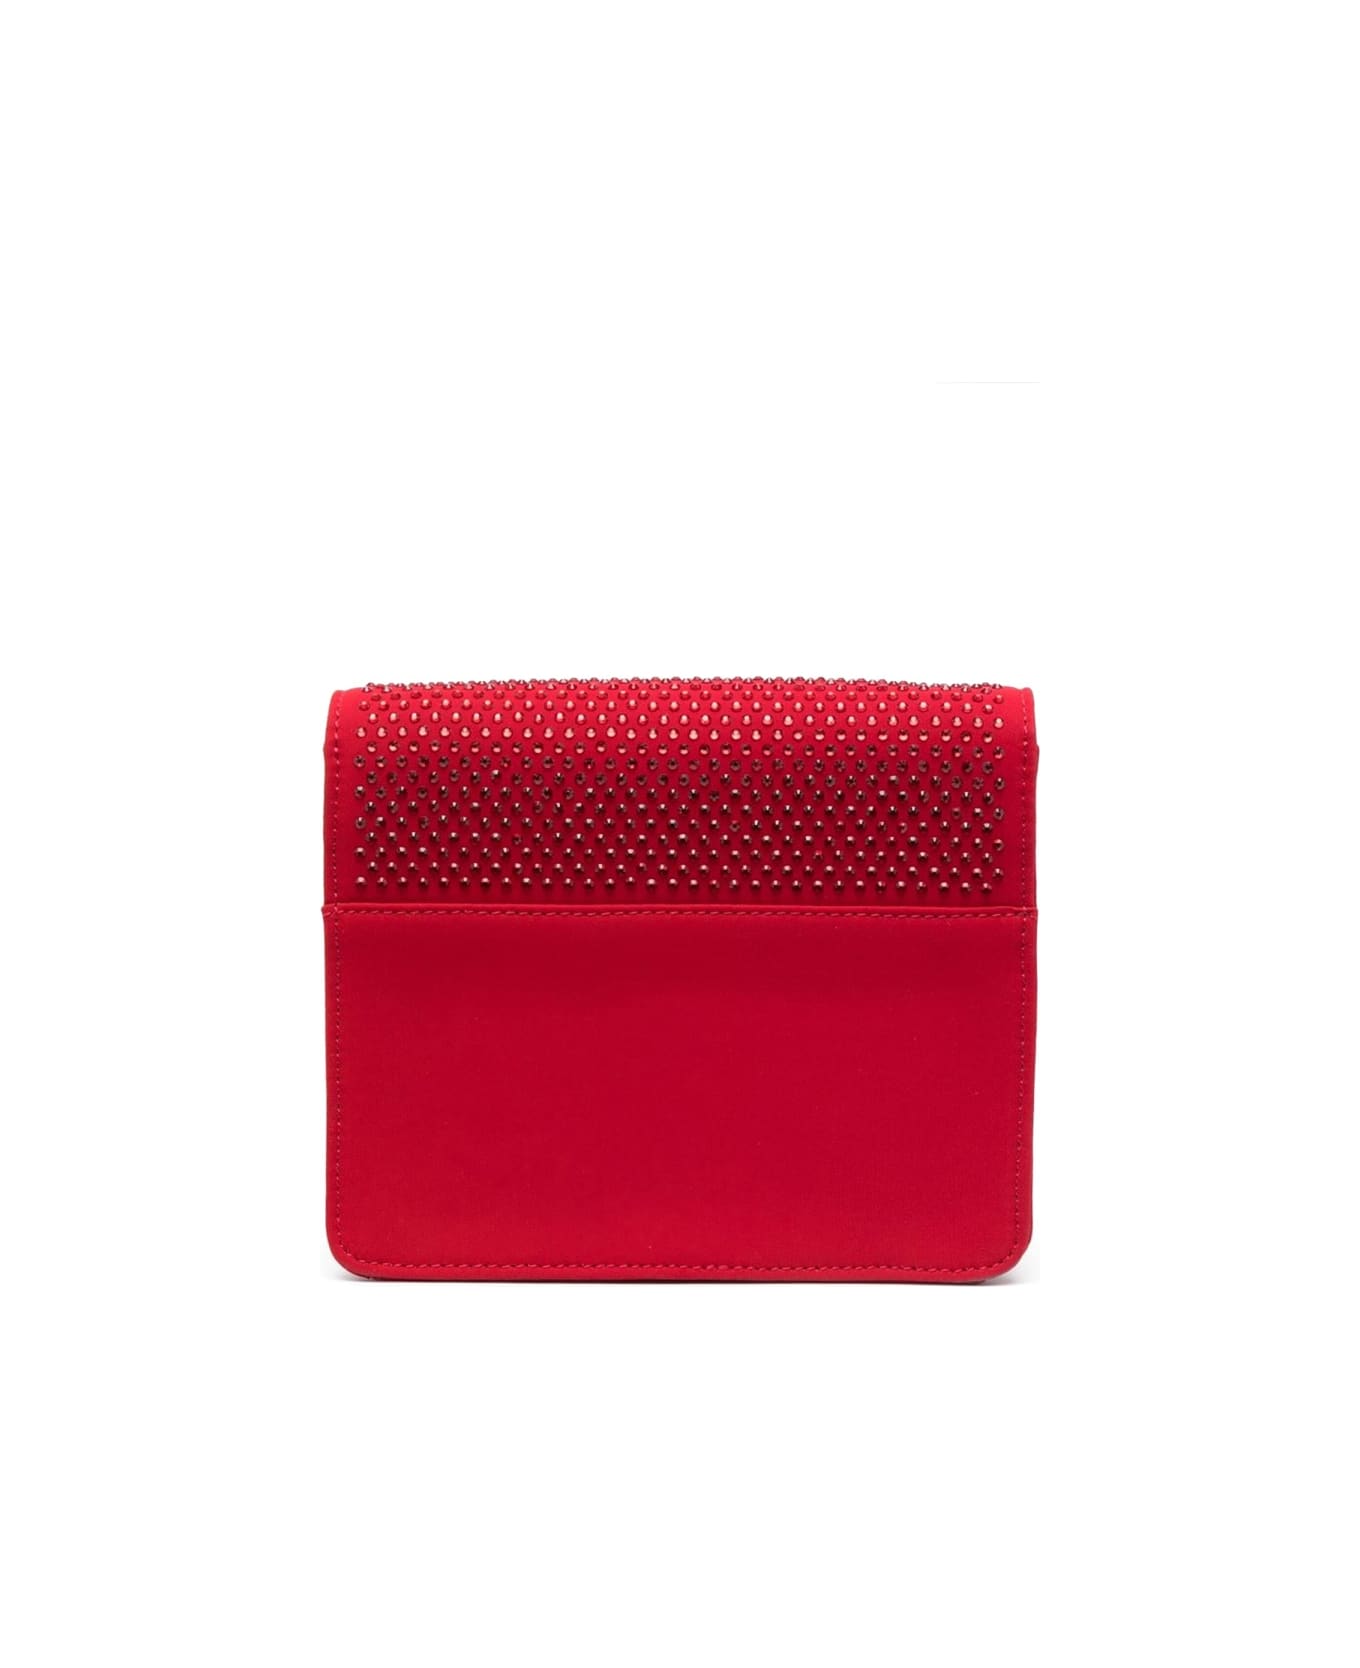 N.21 Pouch - RED